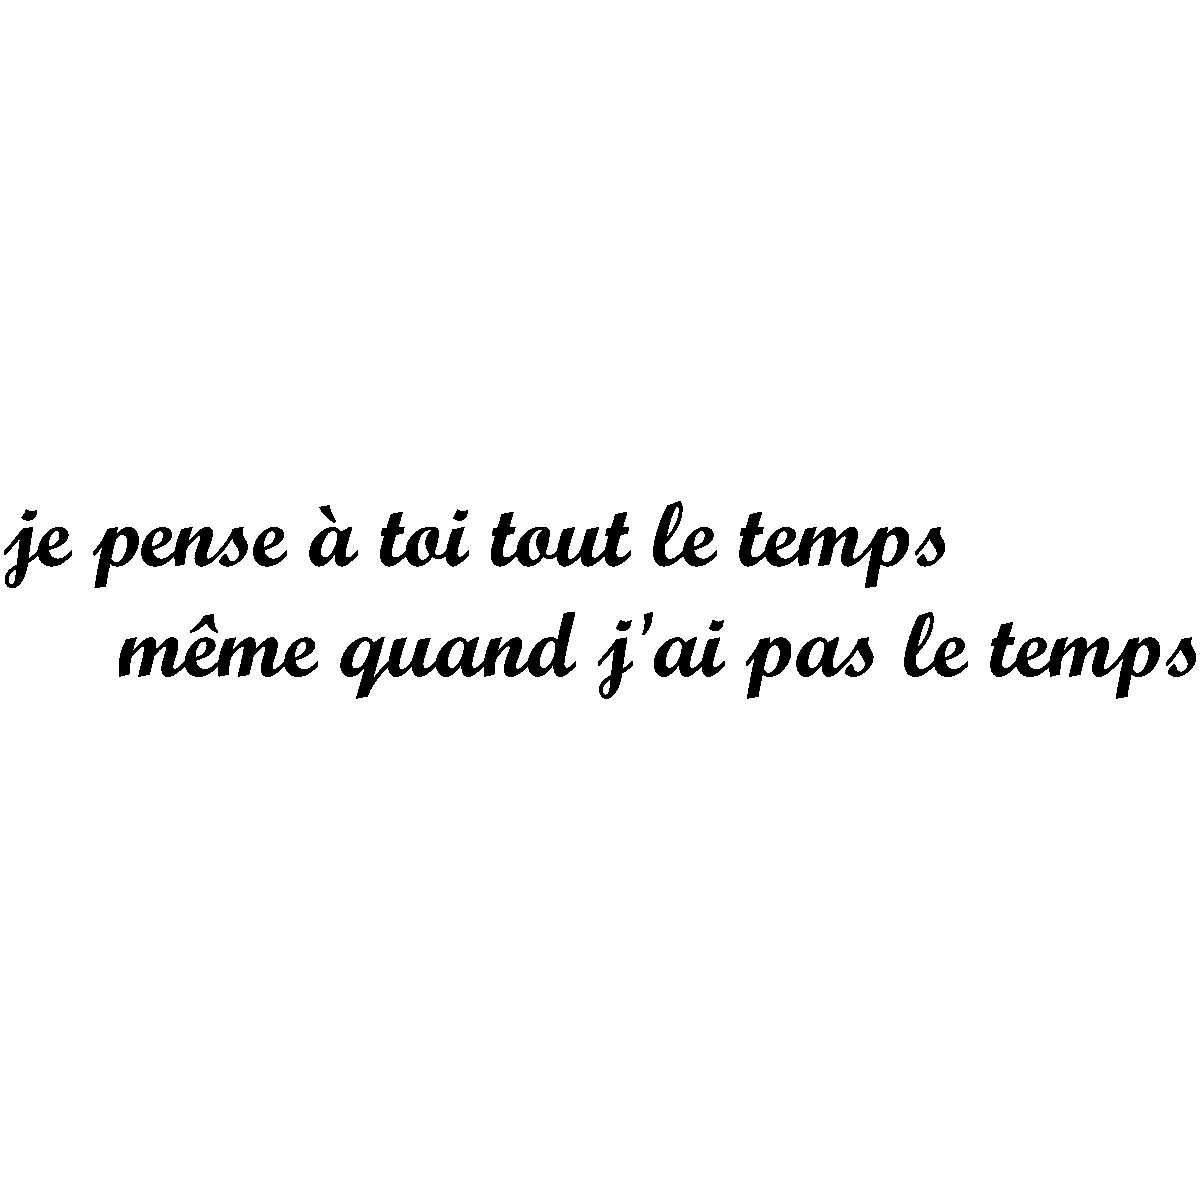 Quote Wall Decal Je Pense A Toi Tout Le Temps Decoration Wall Decals Quote Wall Stickers French Ambiance Sticker